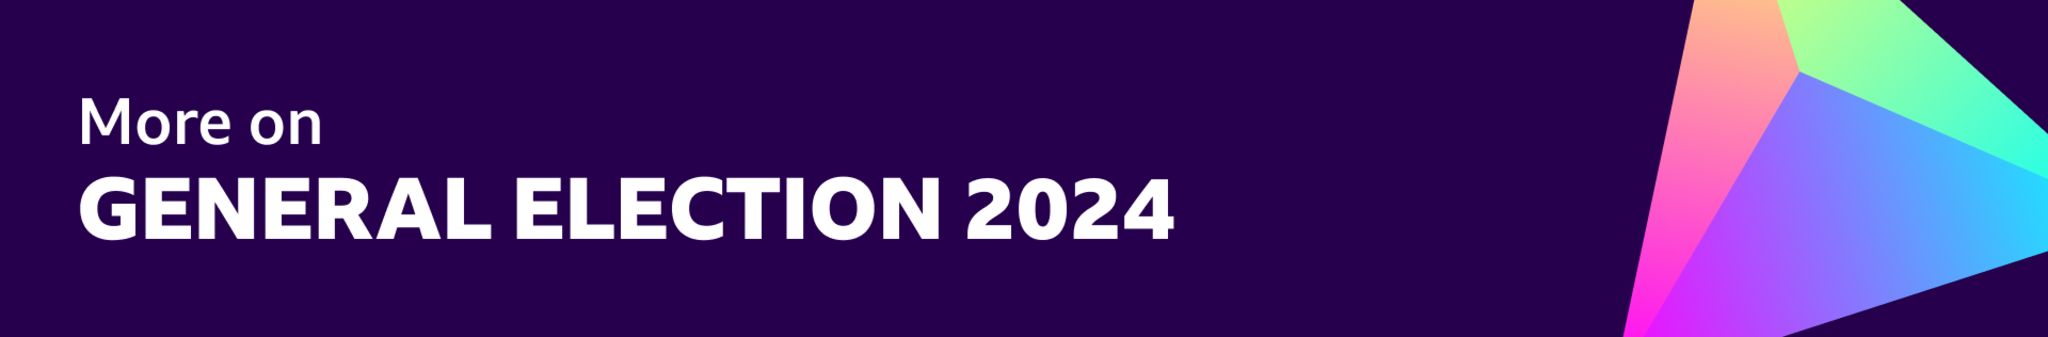 Image that says "More on GENERAL ELECTION 2024"